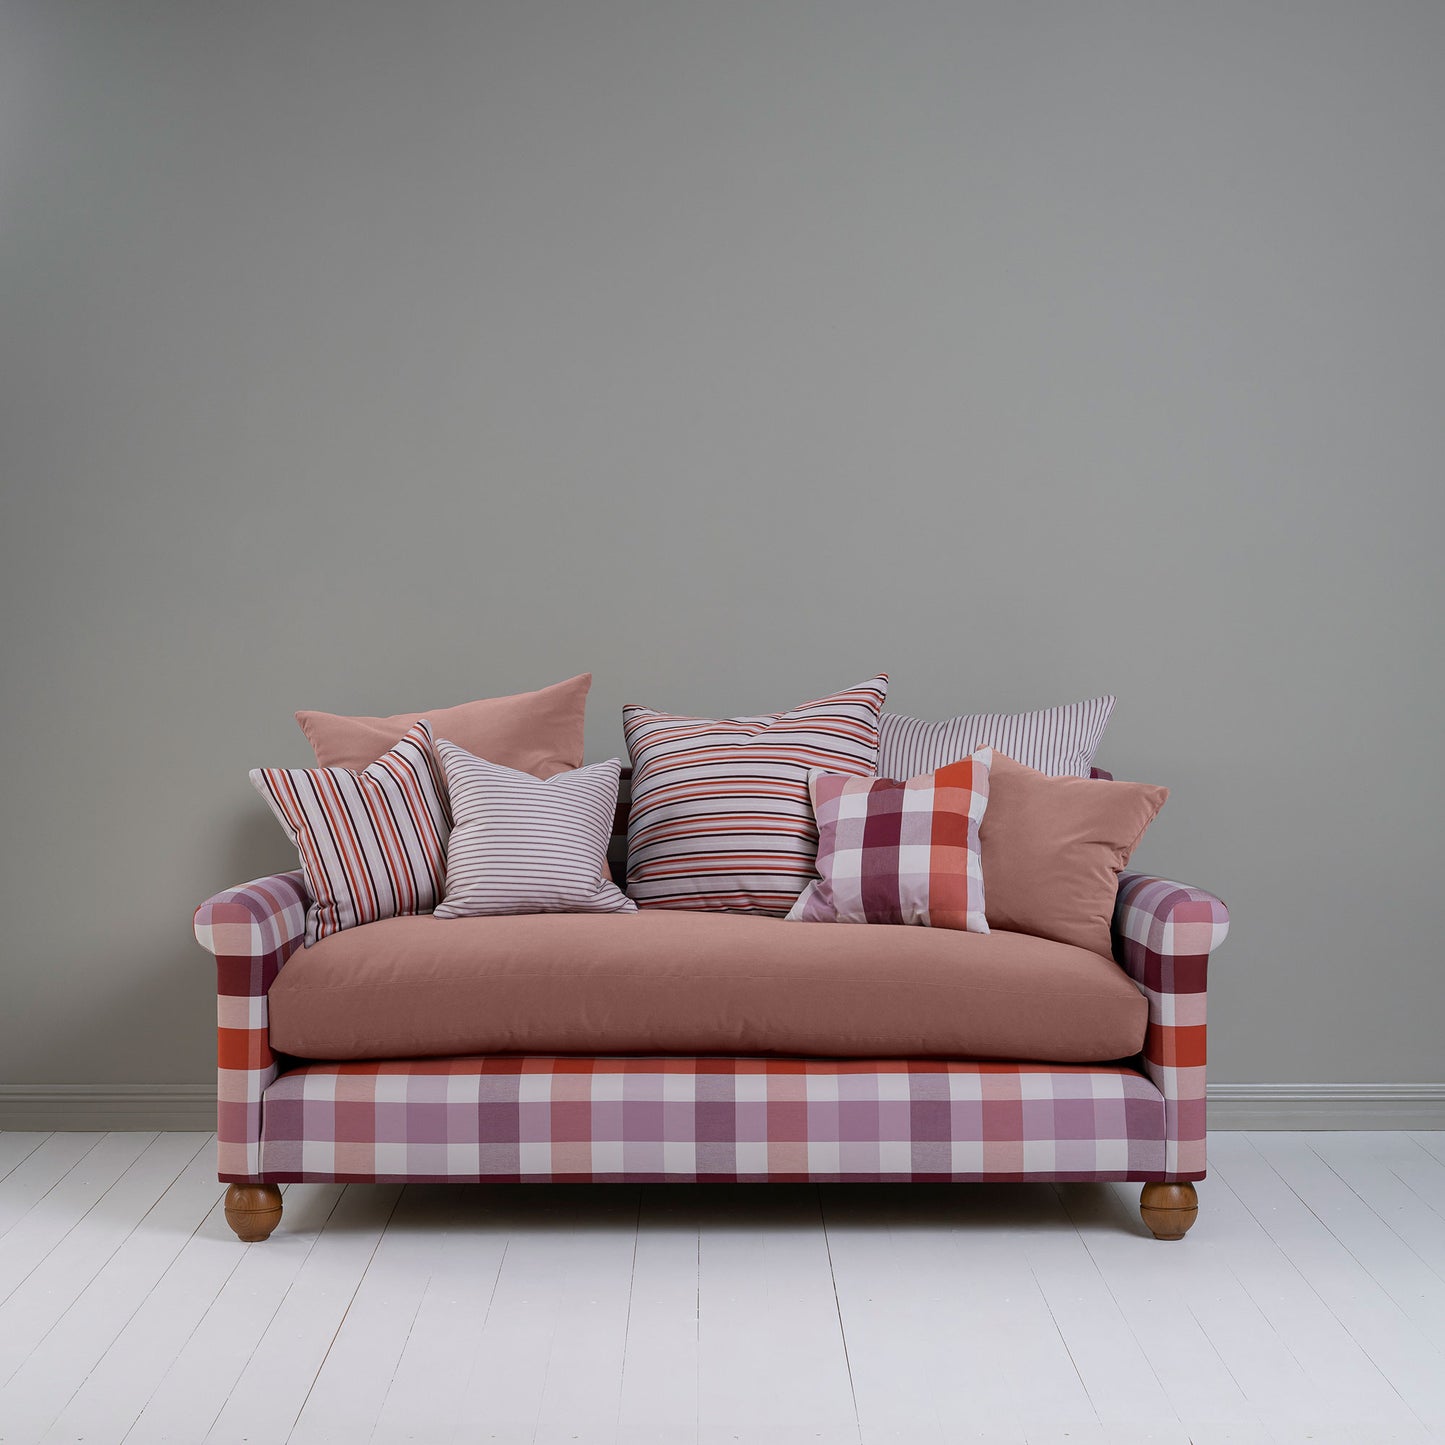 Idler 3 Seater Sofa in Checkmate Cotton Berry Frame and Intelligent Velvet Rose Seat